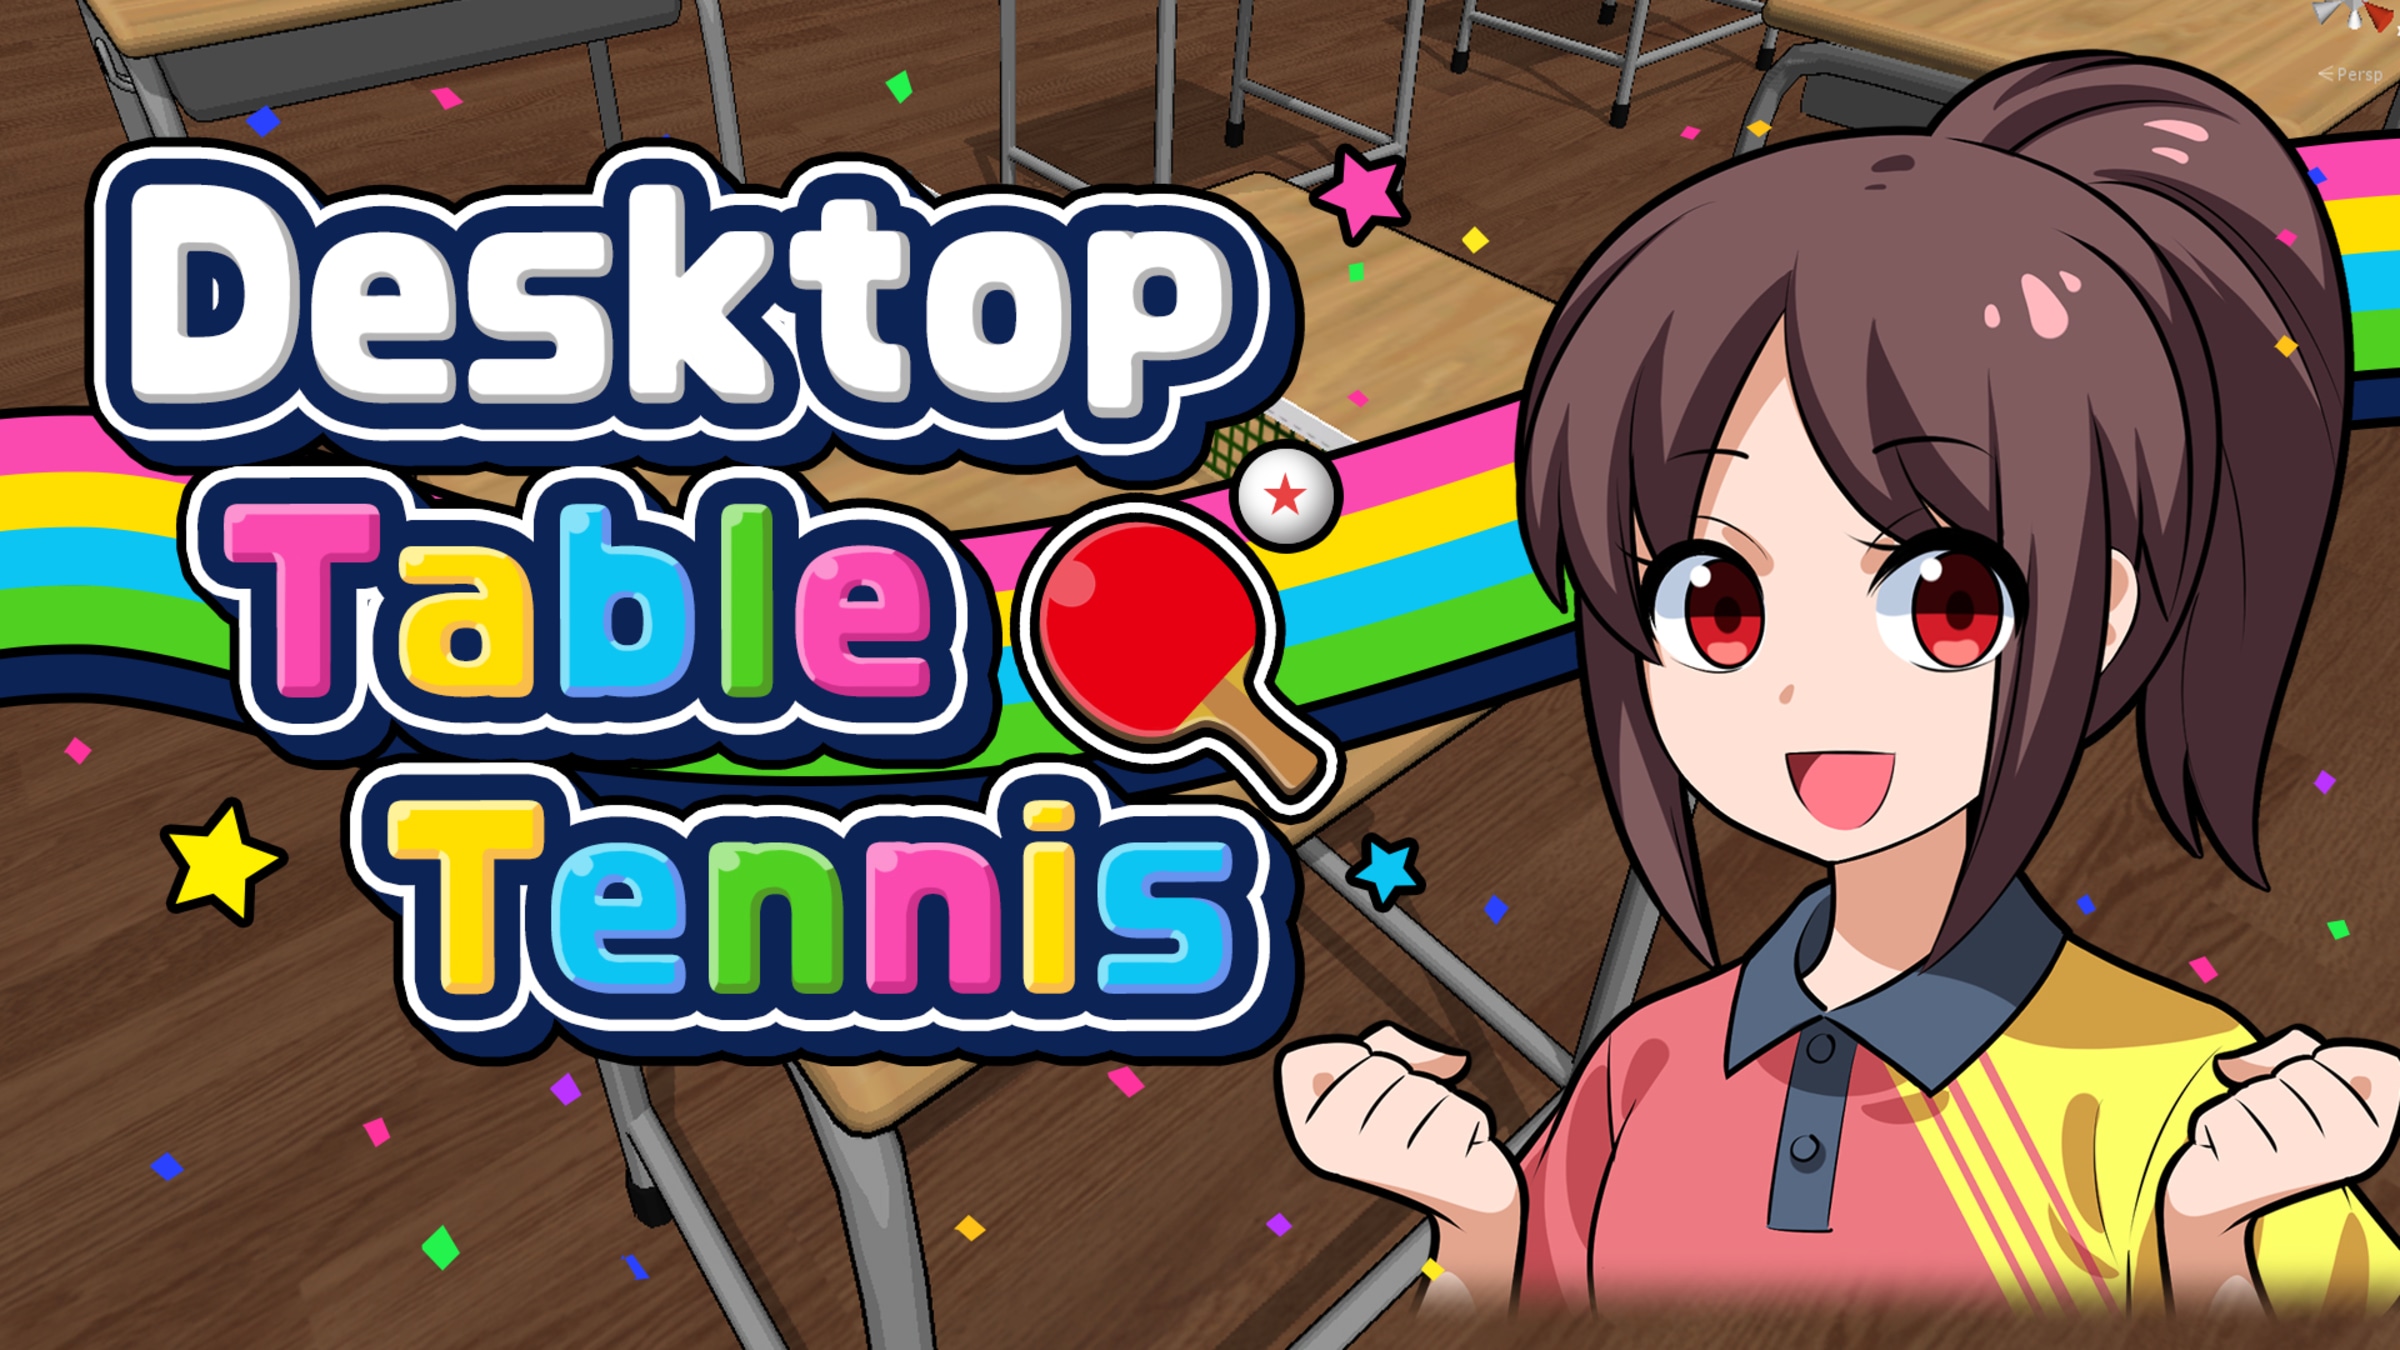 Table Tennis for Nintendo Switch - Nintendo Official Site